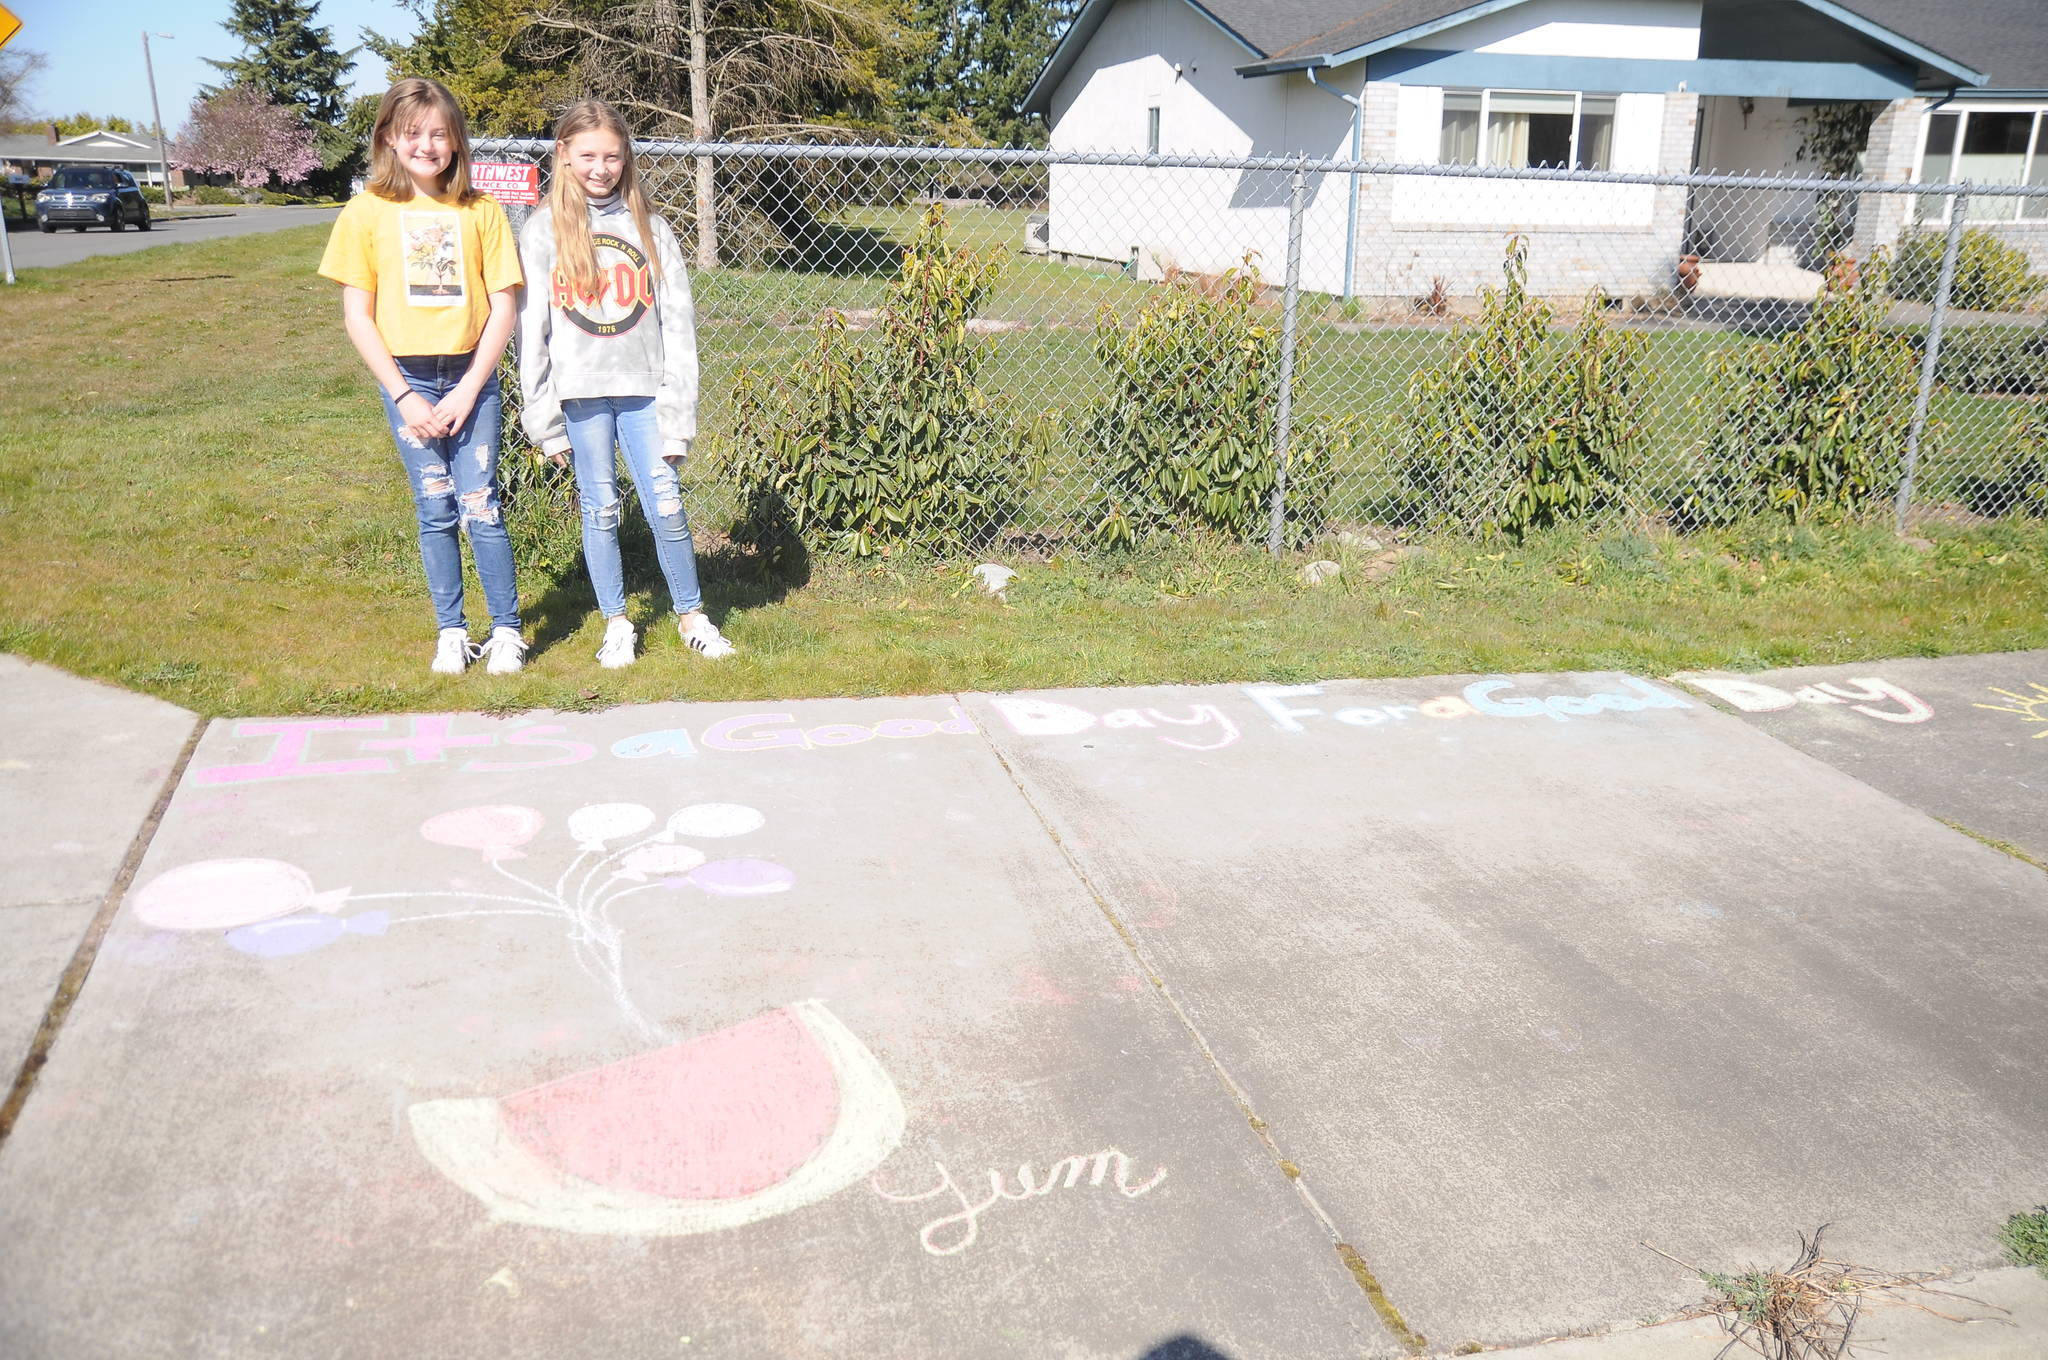 At left, Bailey Stein, 11, Brooklyn Fatherson, almost 11, provide some chalk-fueled cheer on East Fir Street on March 20. Sequim Gazette photo by Michael Dashiell